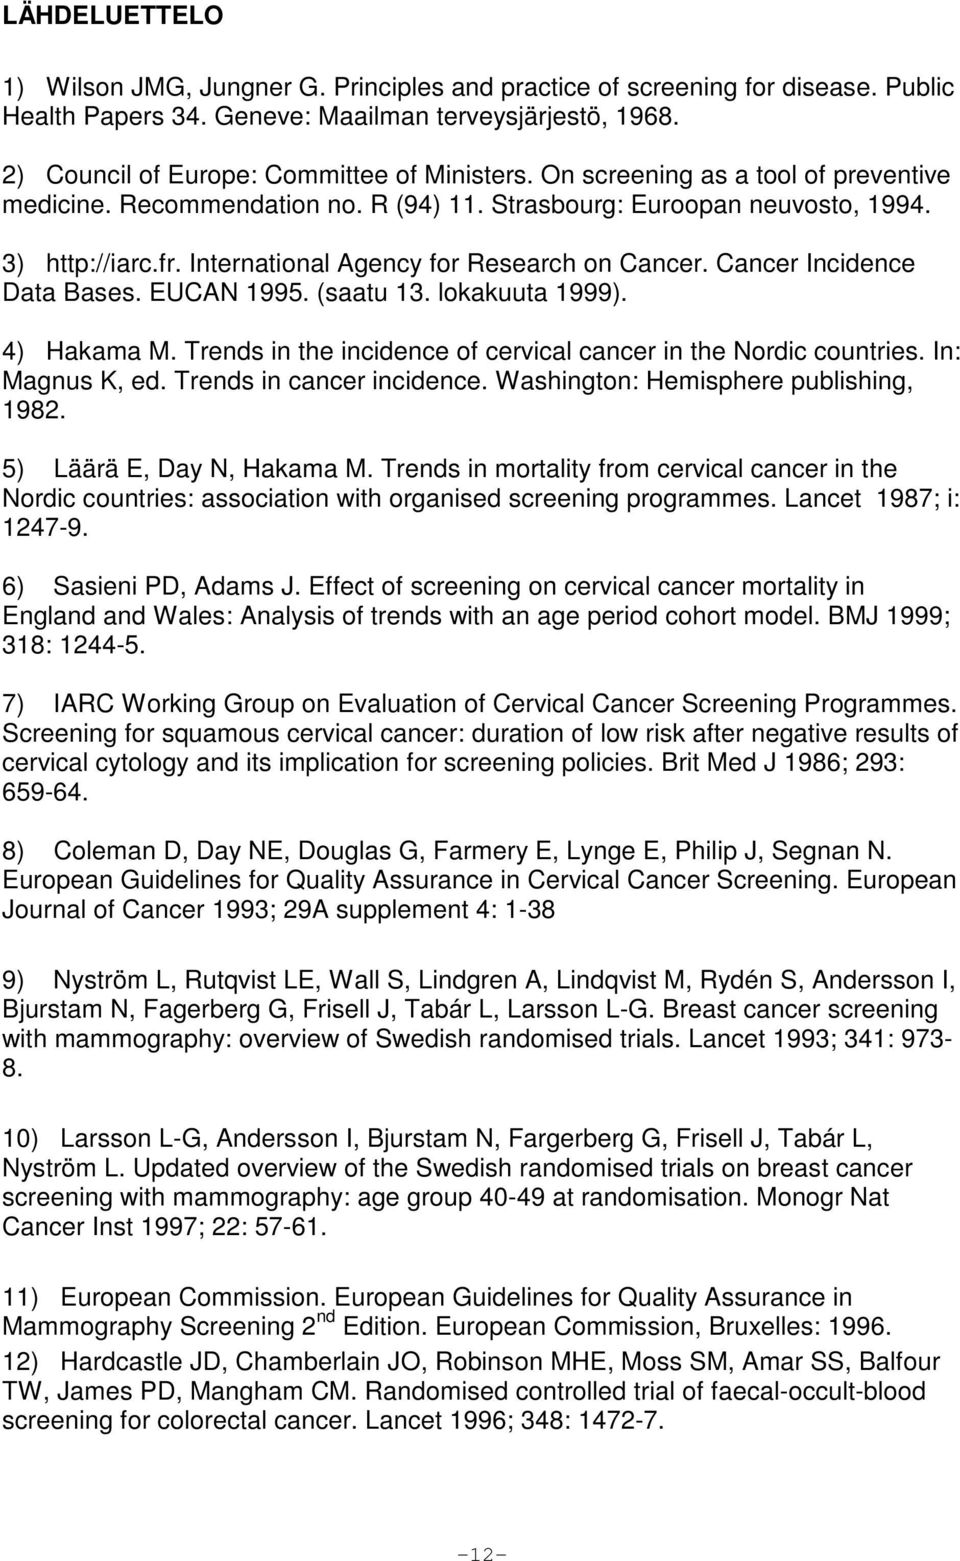 Cancer Incidence Data Bases. EUCAN 1995. (saatu 13. lokakuuta 1999). 4) Hakama M. Trends in the incidence of cervical cancer in the Nordic countries. In: Magnus K, ed. Trends in cancer incidence.